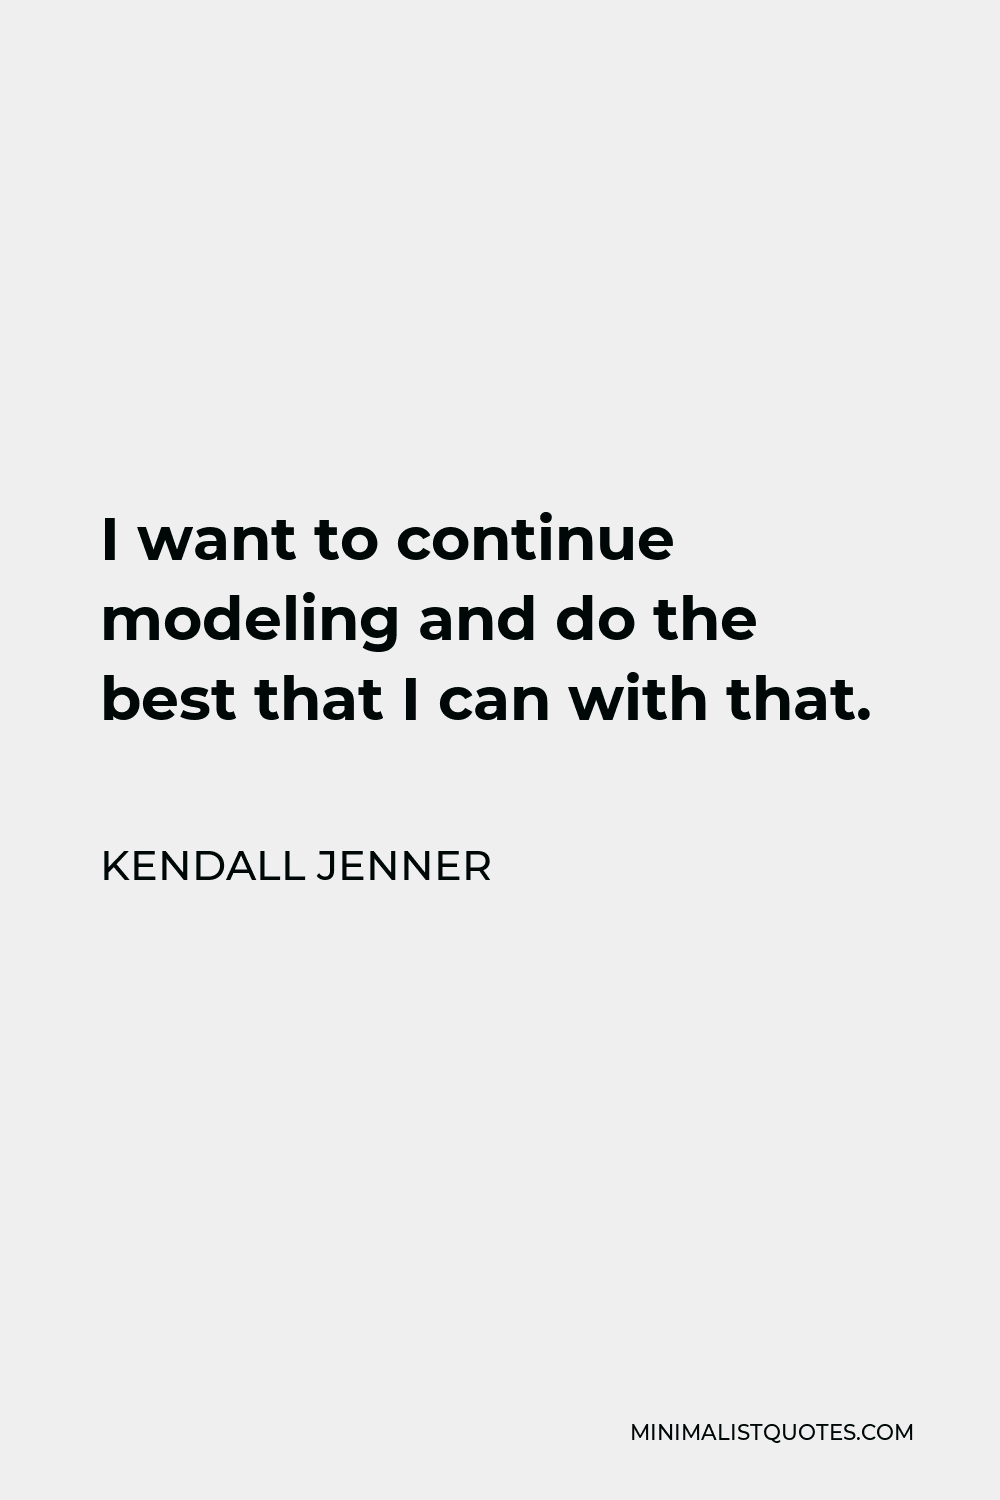 Kendall Jenner Quote - I want to continue modeling and do the best that I can with that.